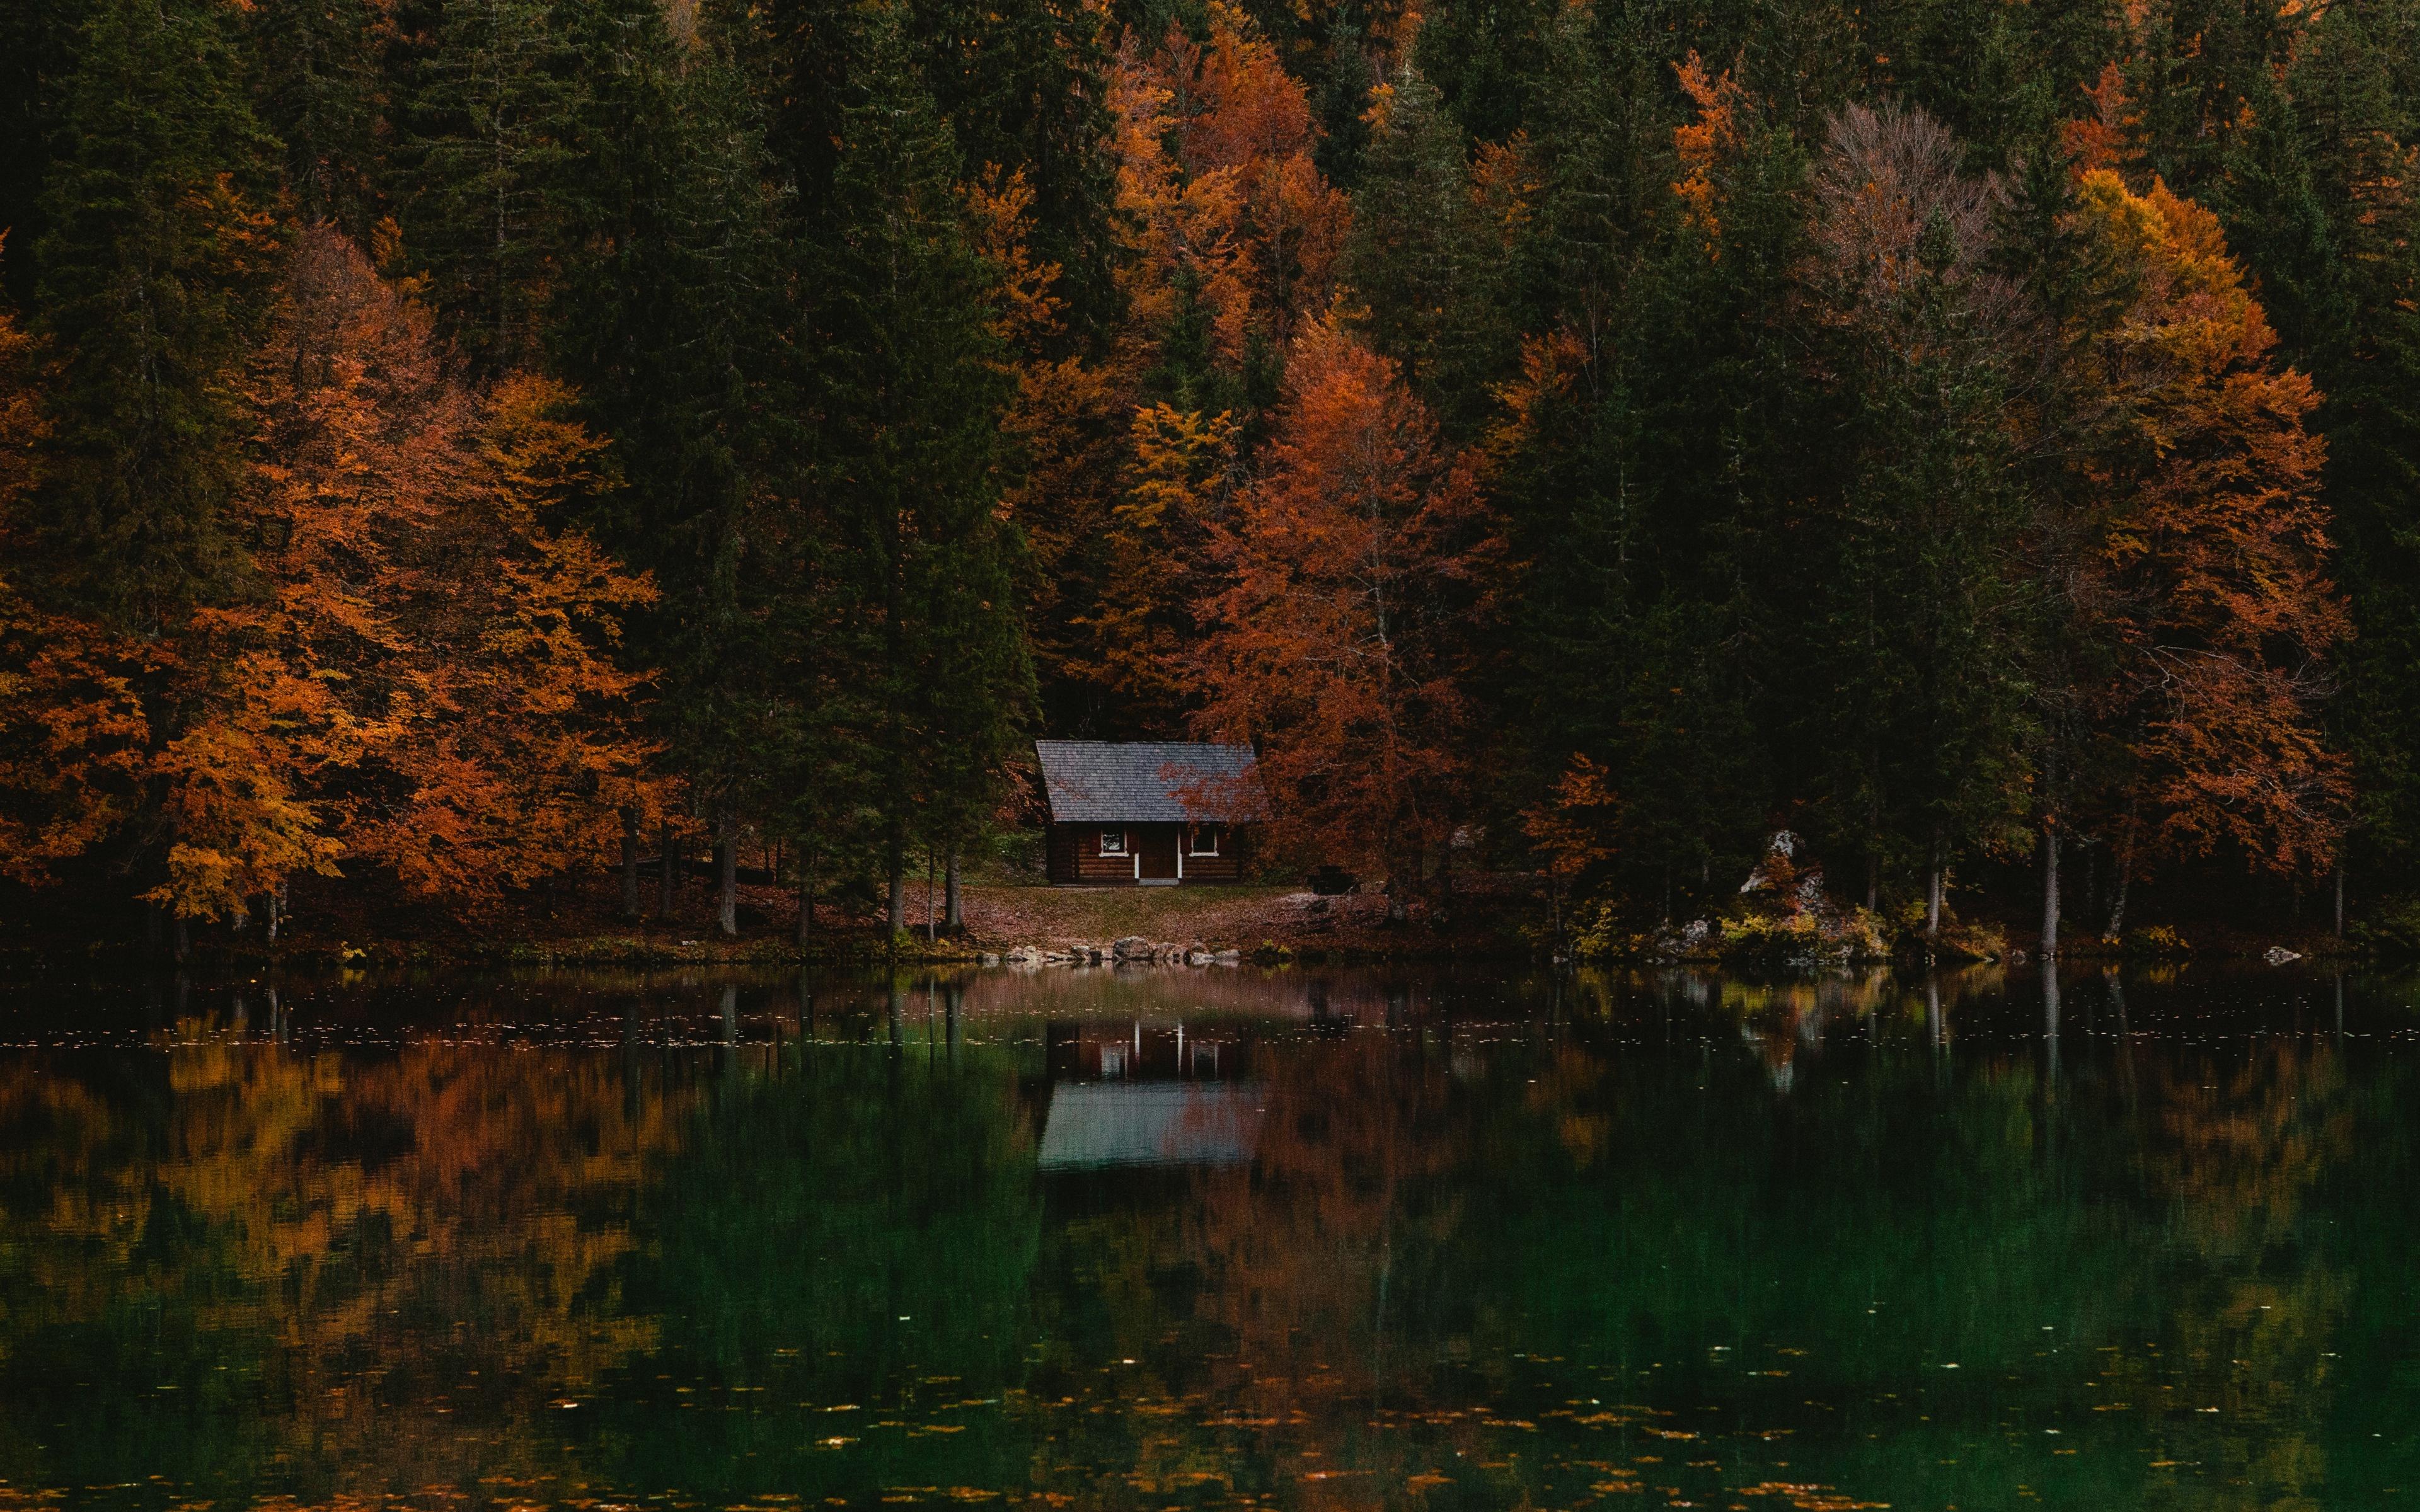 Download wallpaper 3840x2400 forest, house, autumn, lake